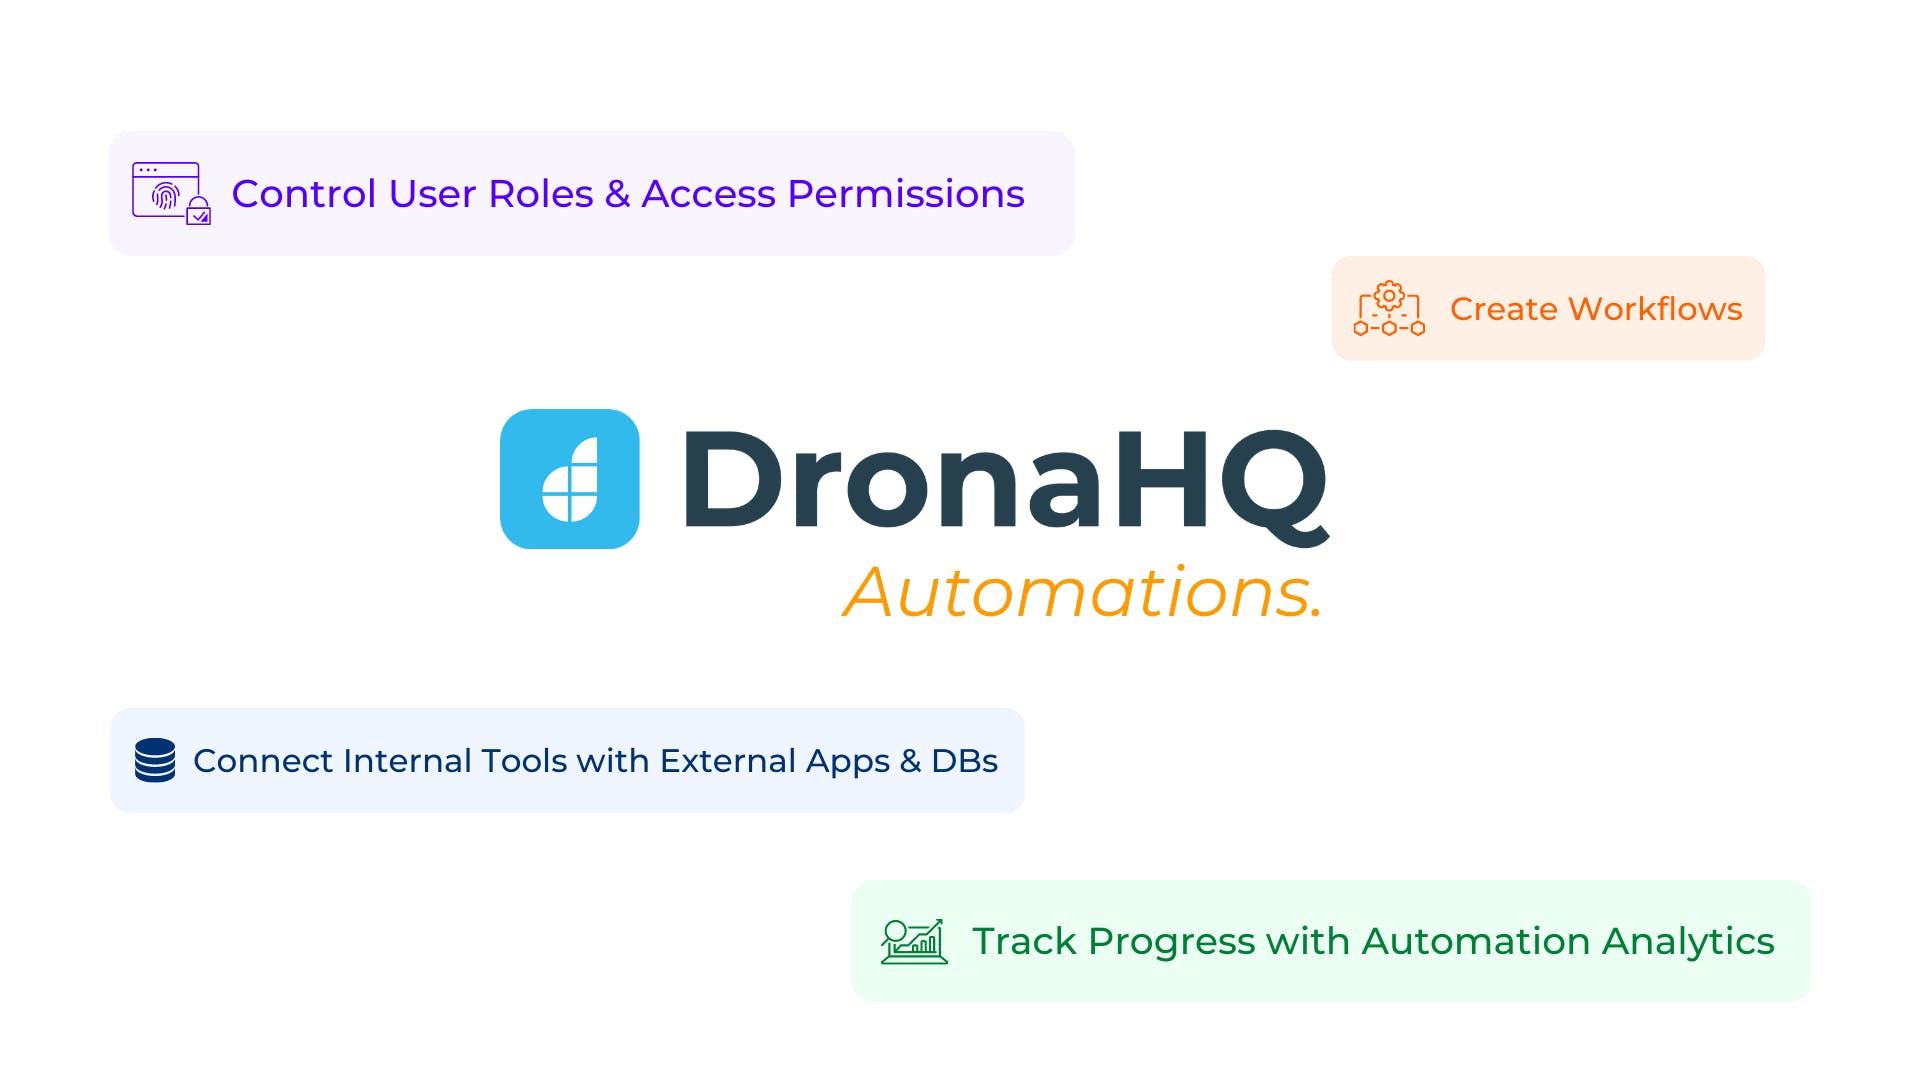 Find pricing, reviews and other details about Automation 2.0 by DronaHQ